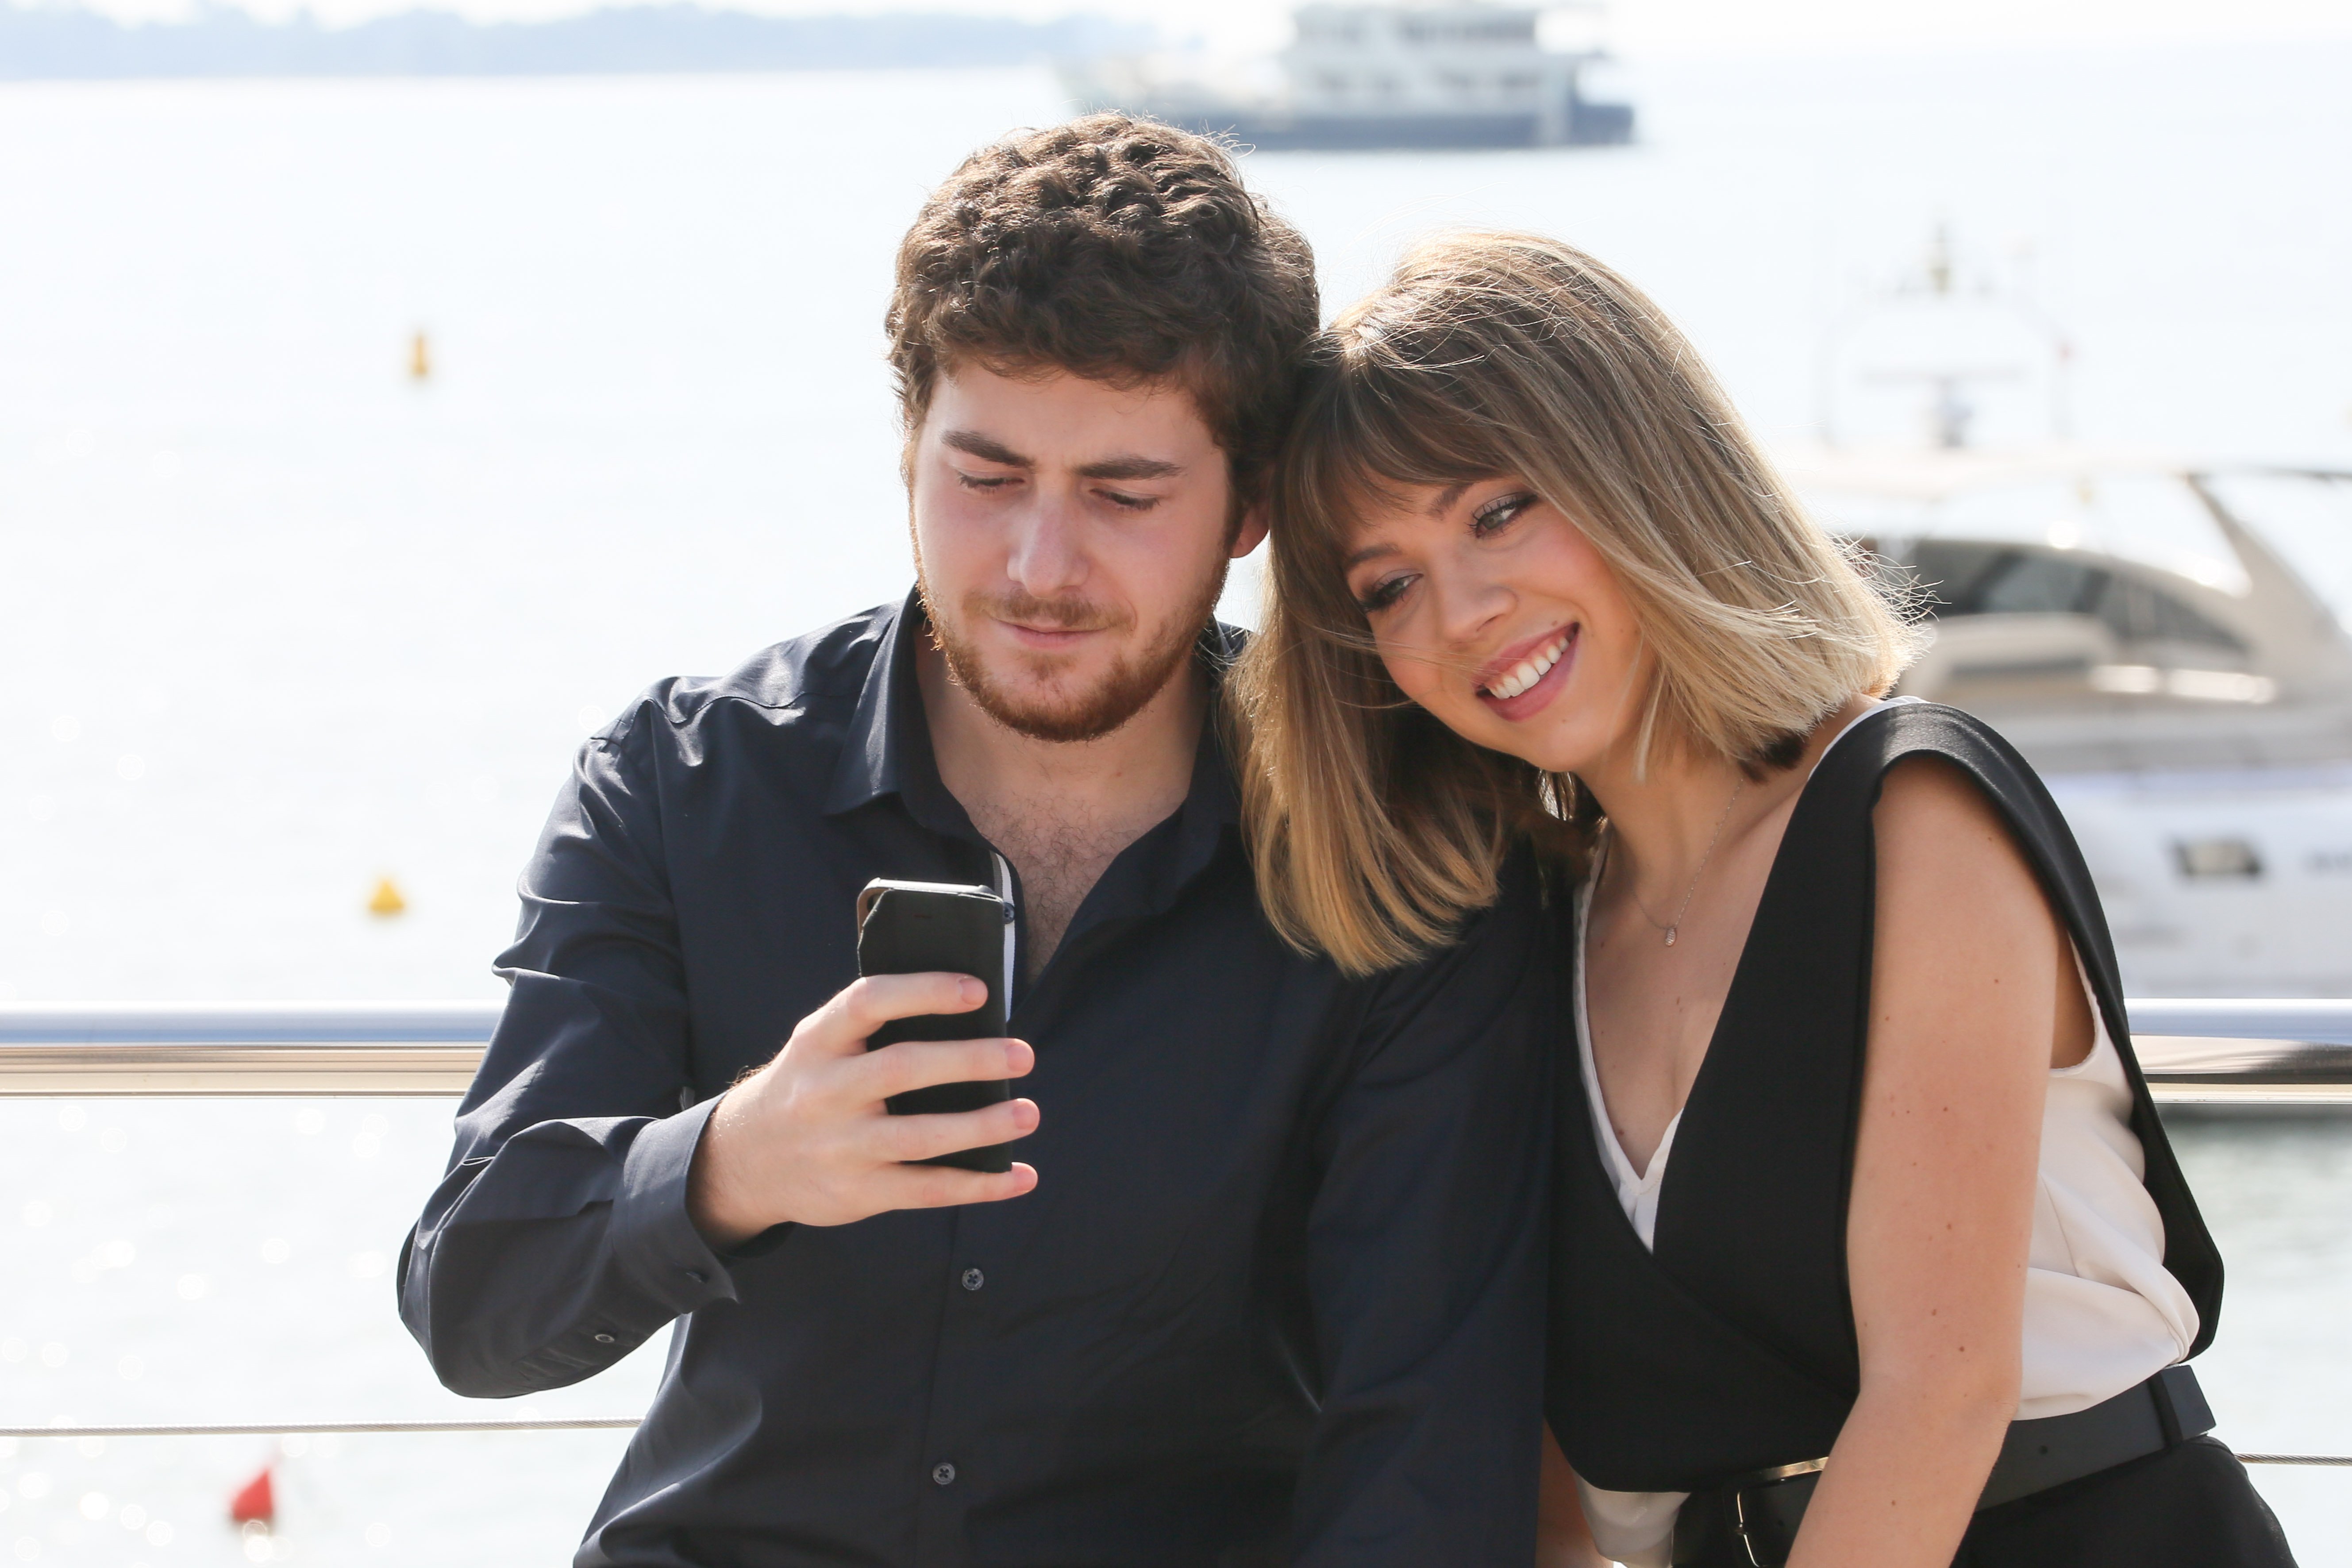 Jennette McCurdy and Jesse Carere at the photocall for "Between" on October 5, 2015 | Source: Getty Images